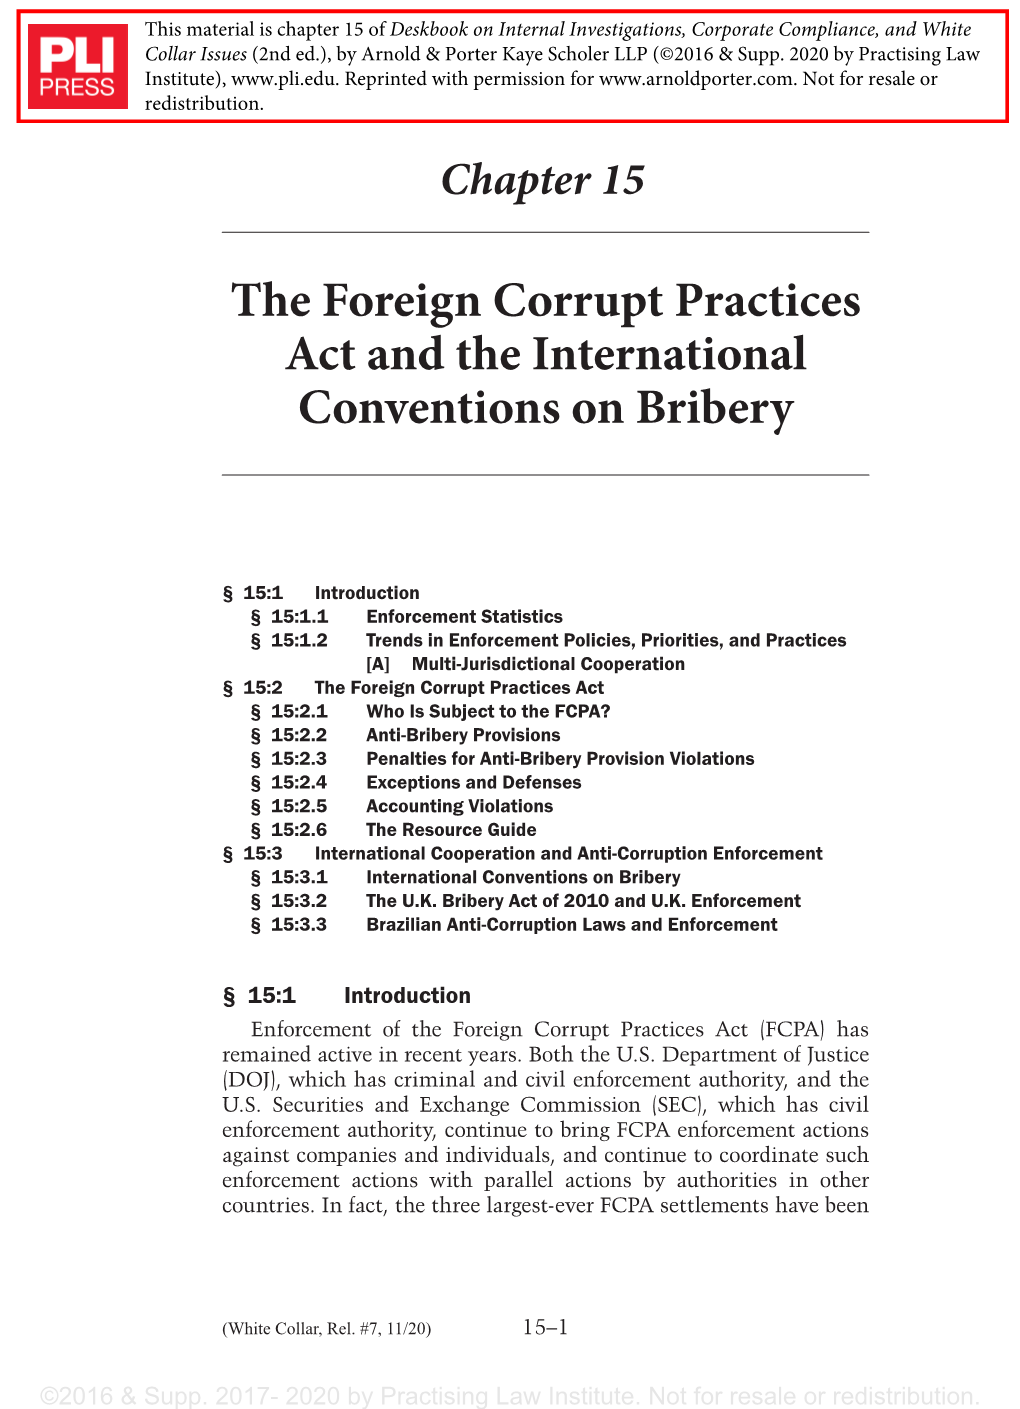 Read Chapter 15: "The Foreign Corrupt Practices